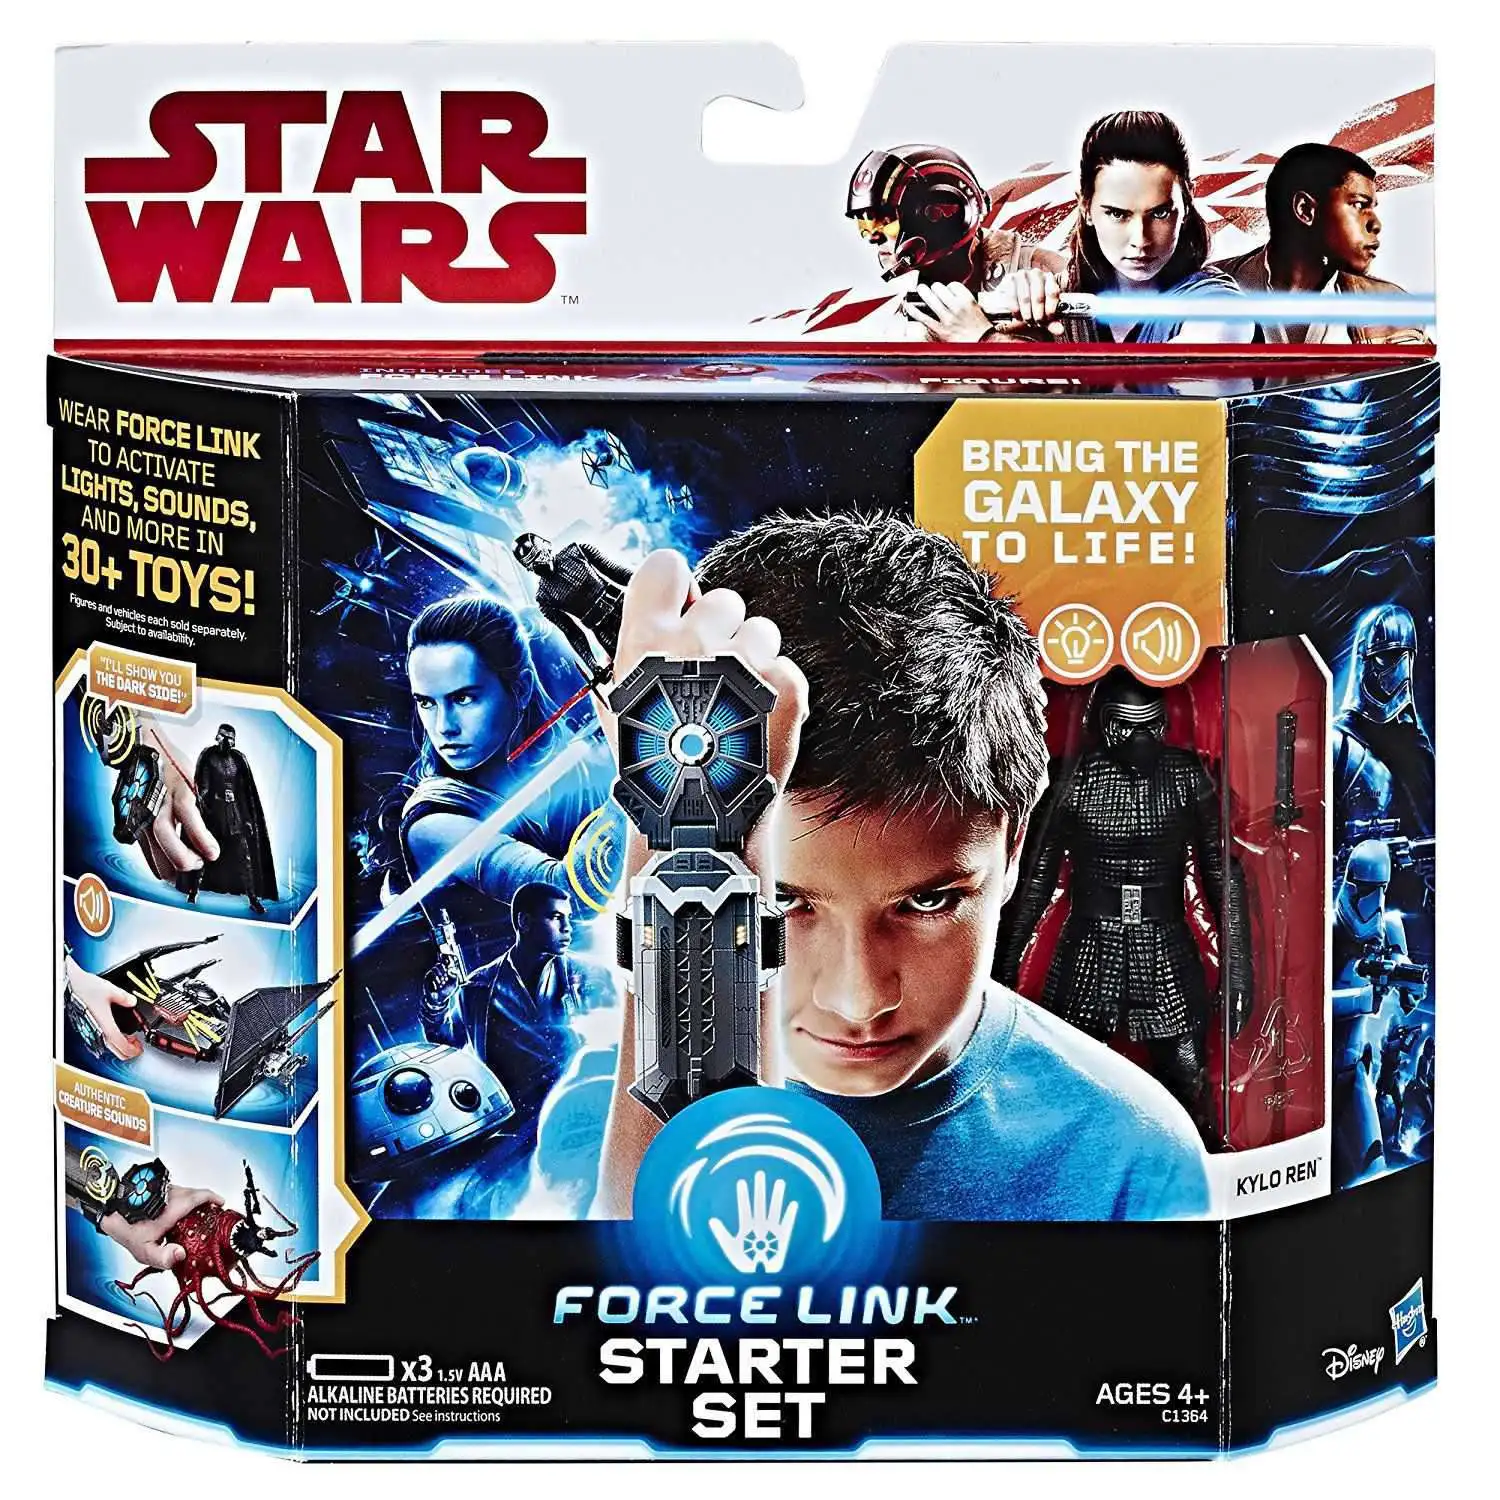 STAR WARS THE FORCE AWAKENS COLLECTION FORCE LINK STARTER MIT KYLO REN HASBRO 